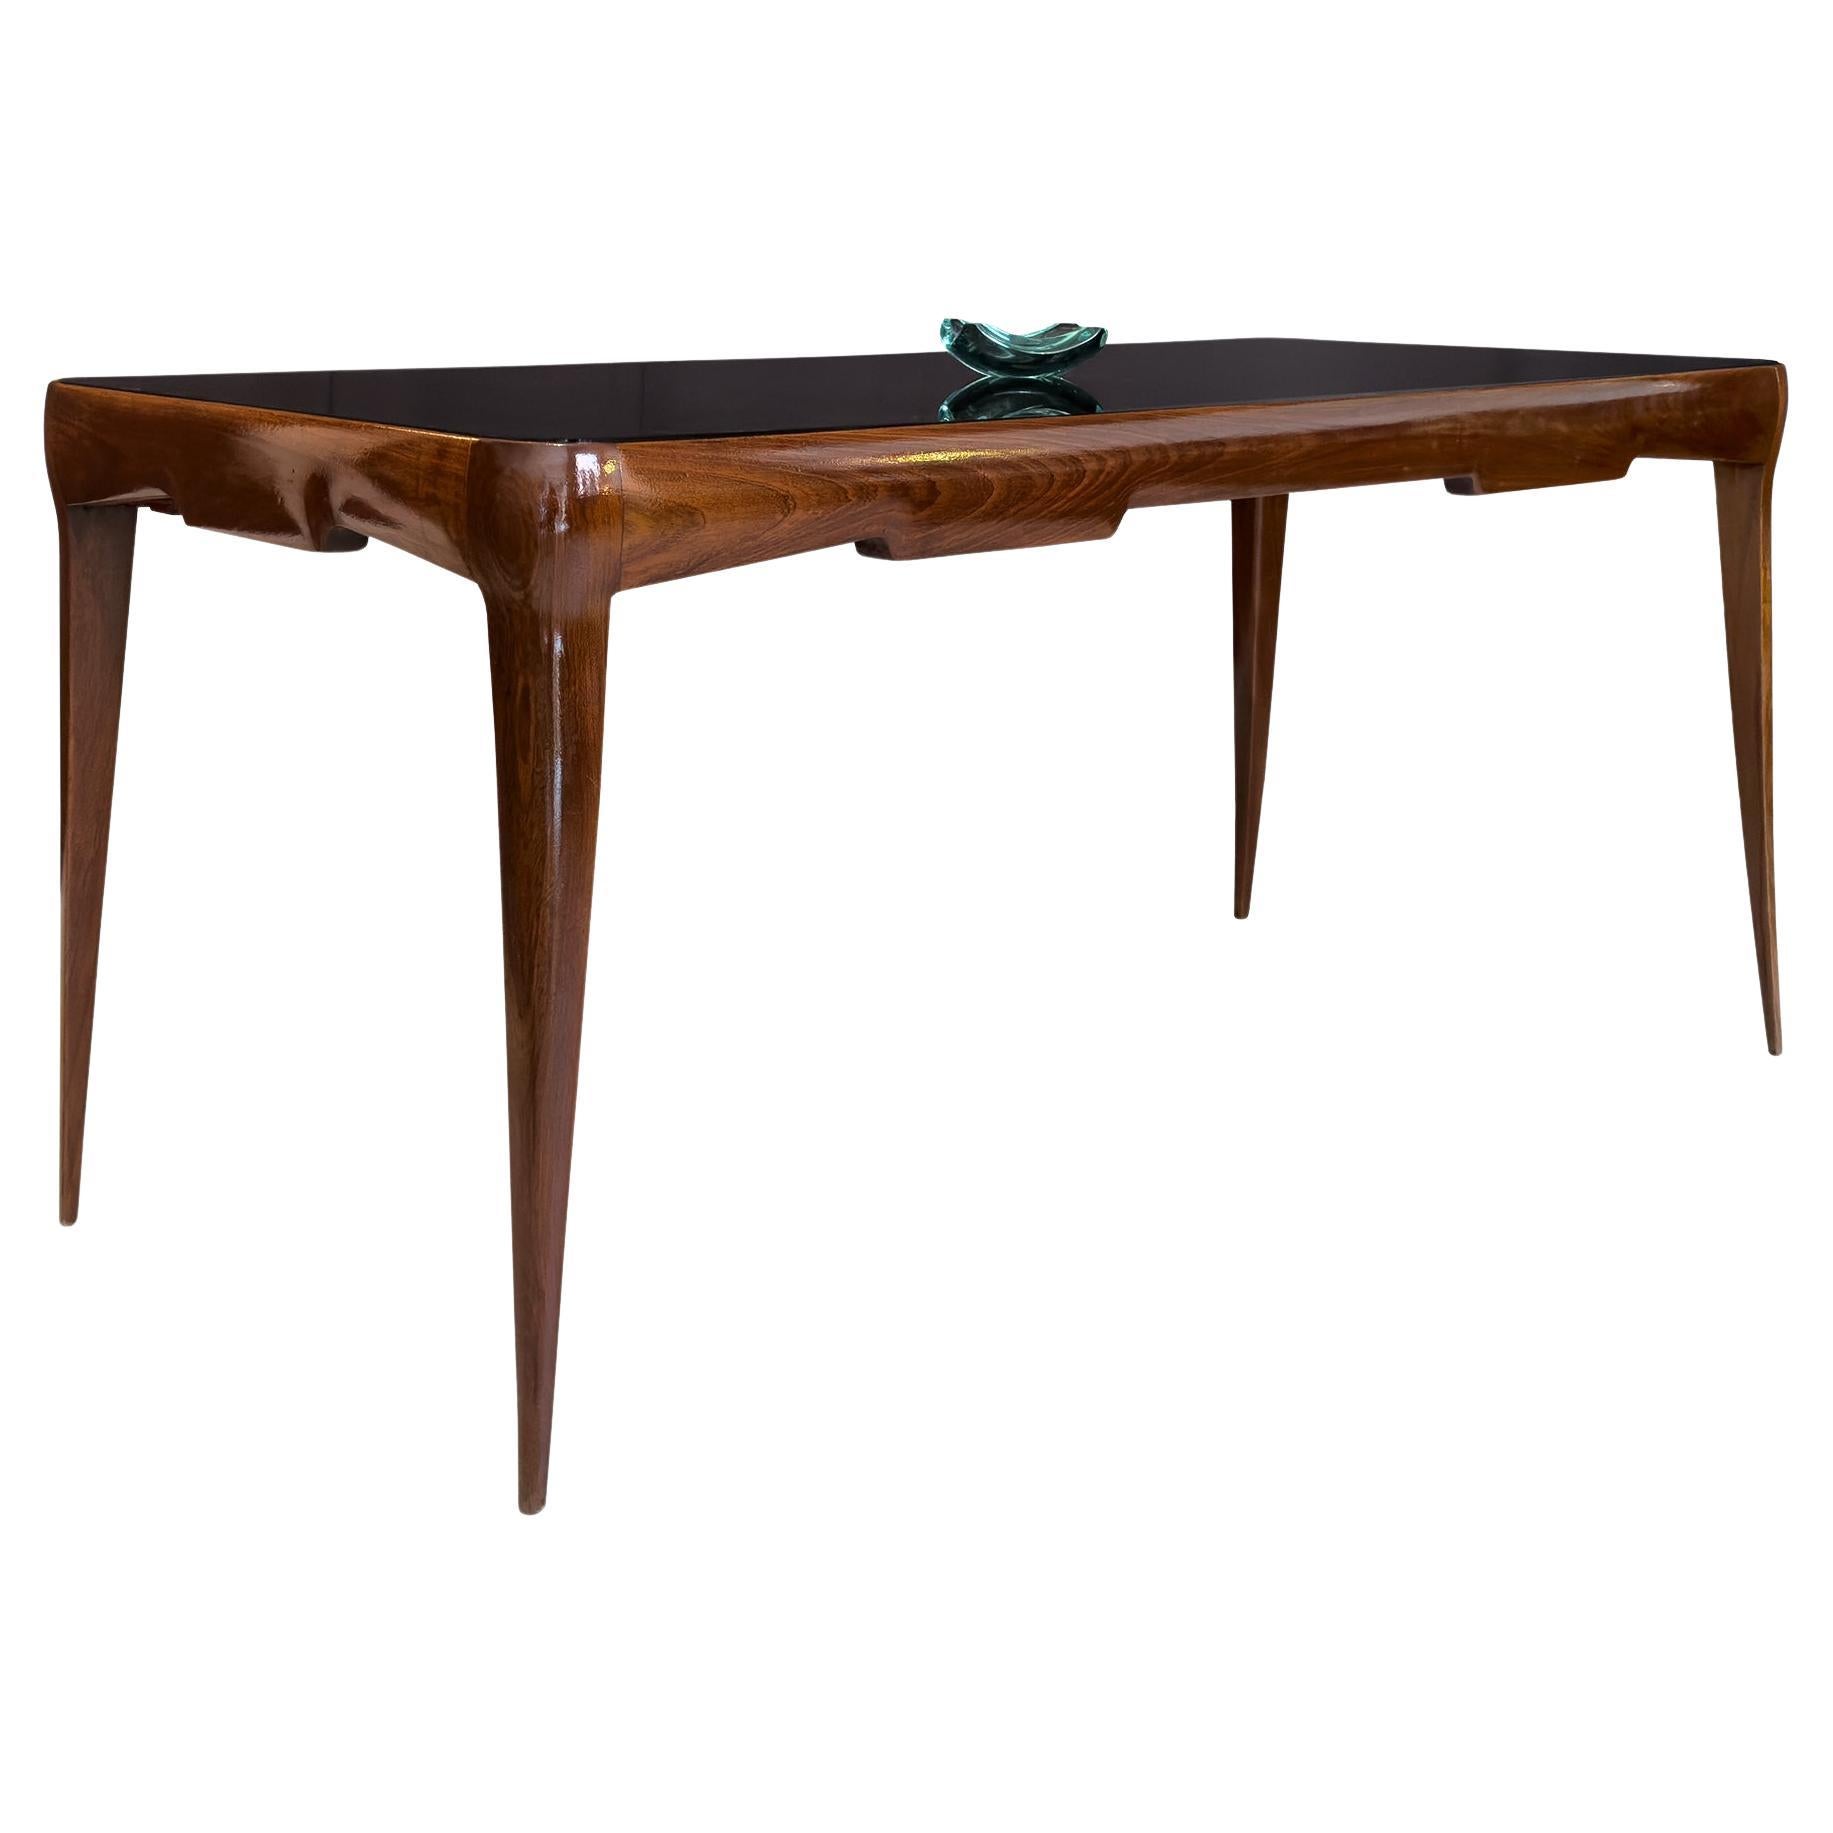 Italian Mid-Century Dining Table Gio Ponti style, 1950s For Sale